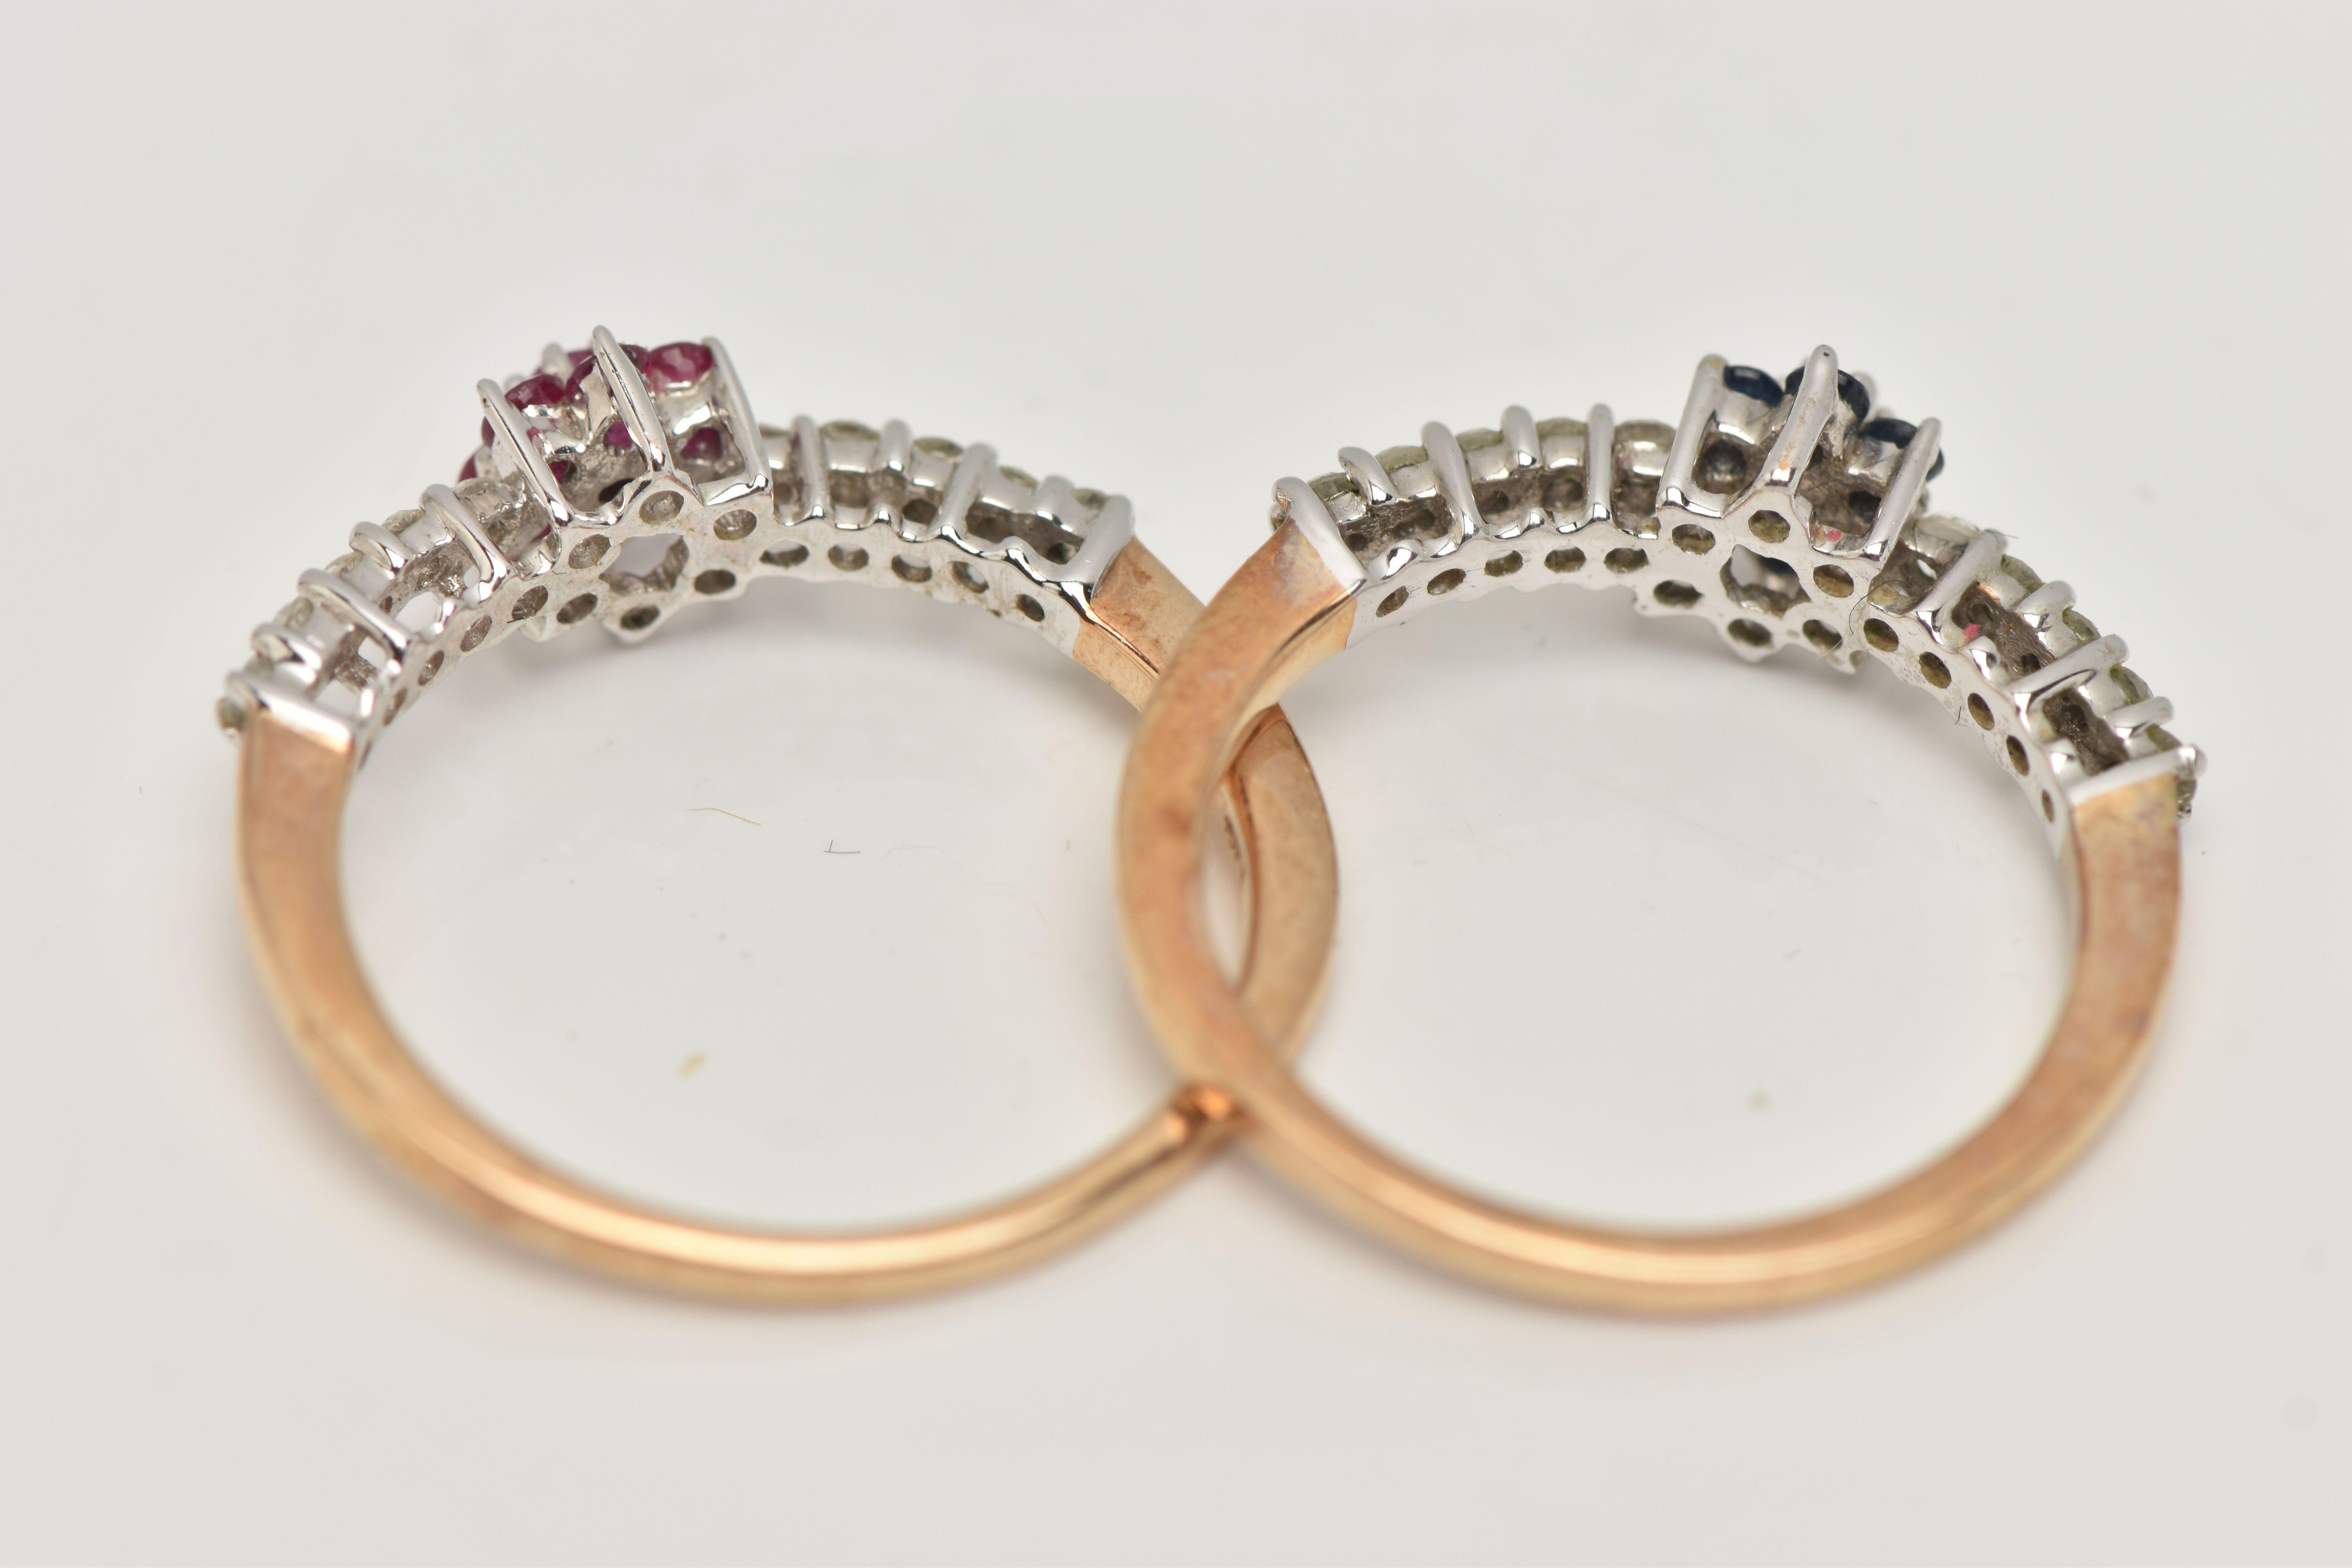 TWO 9CT GOLD GEM SET RINGS, both designed with a line of brilliant cut diamonds, the first with a - Image 4 of 4